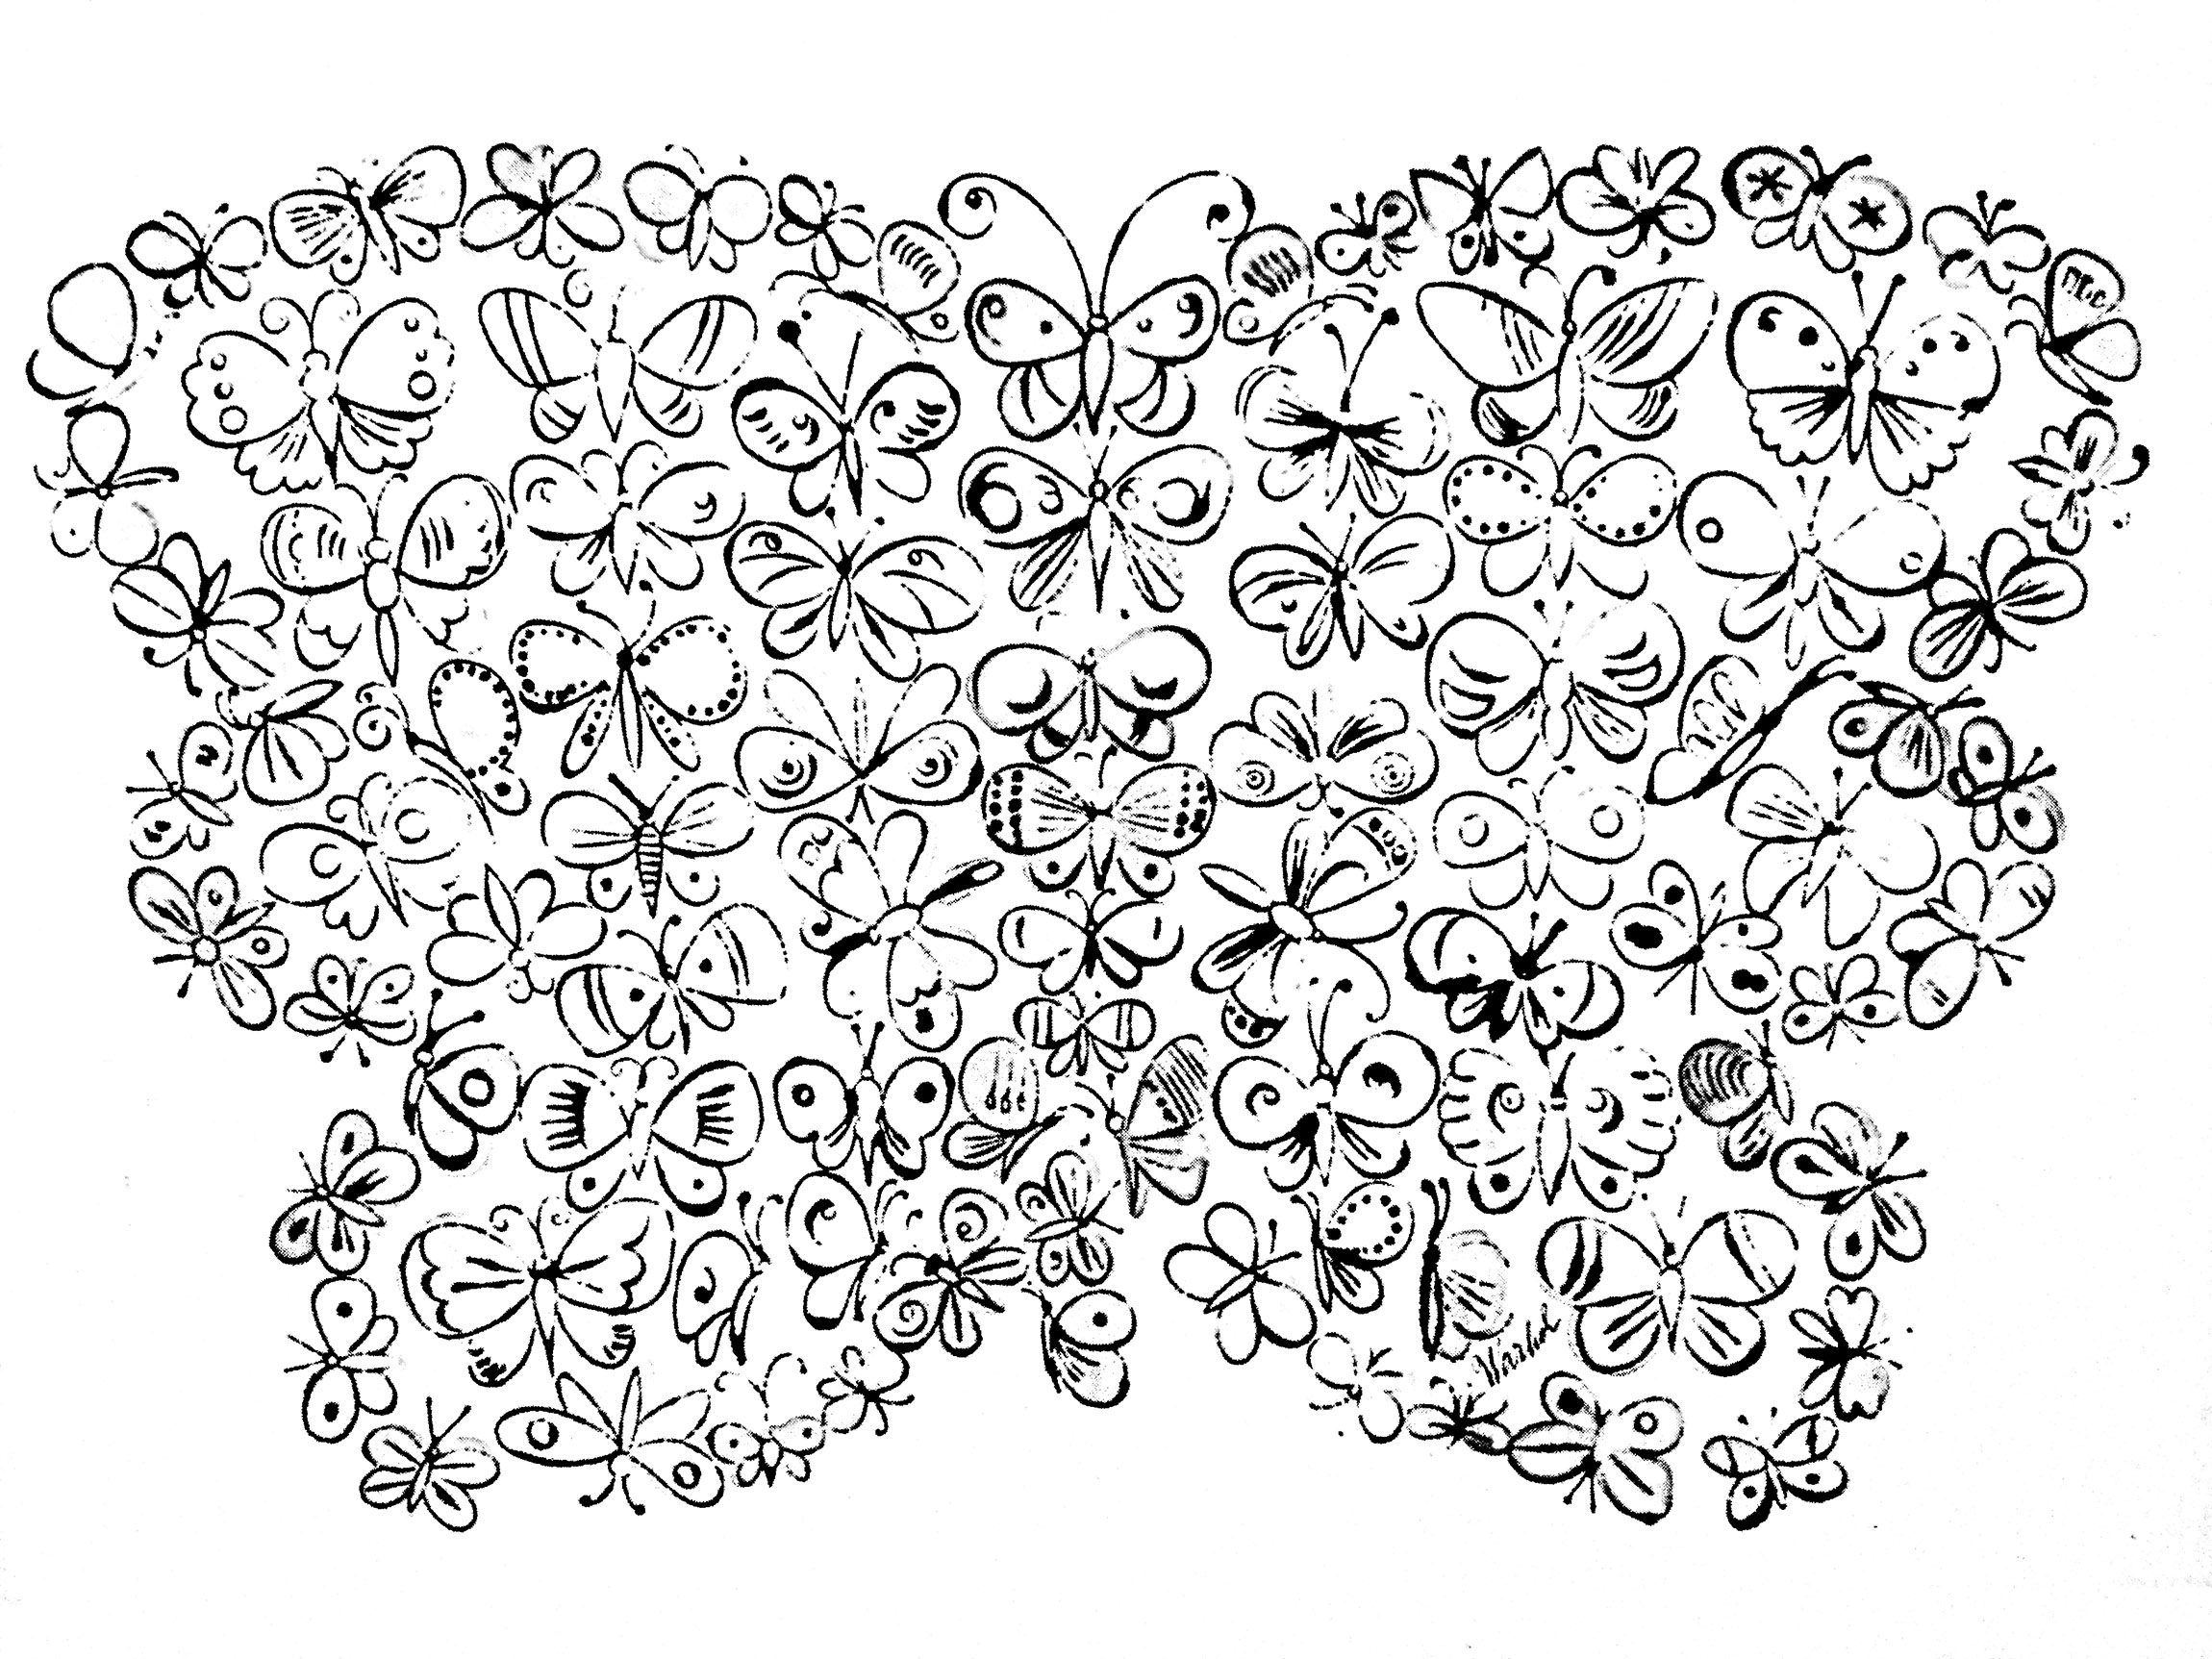 Big butterflies drawn with little ones